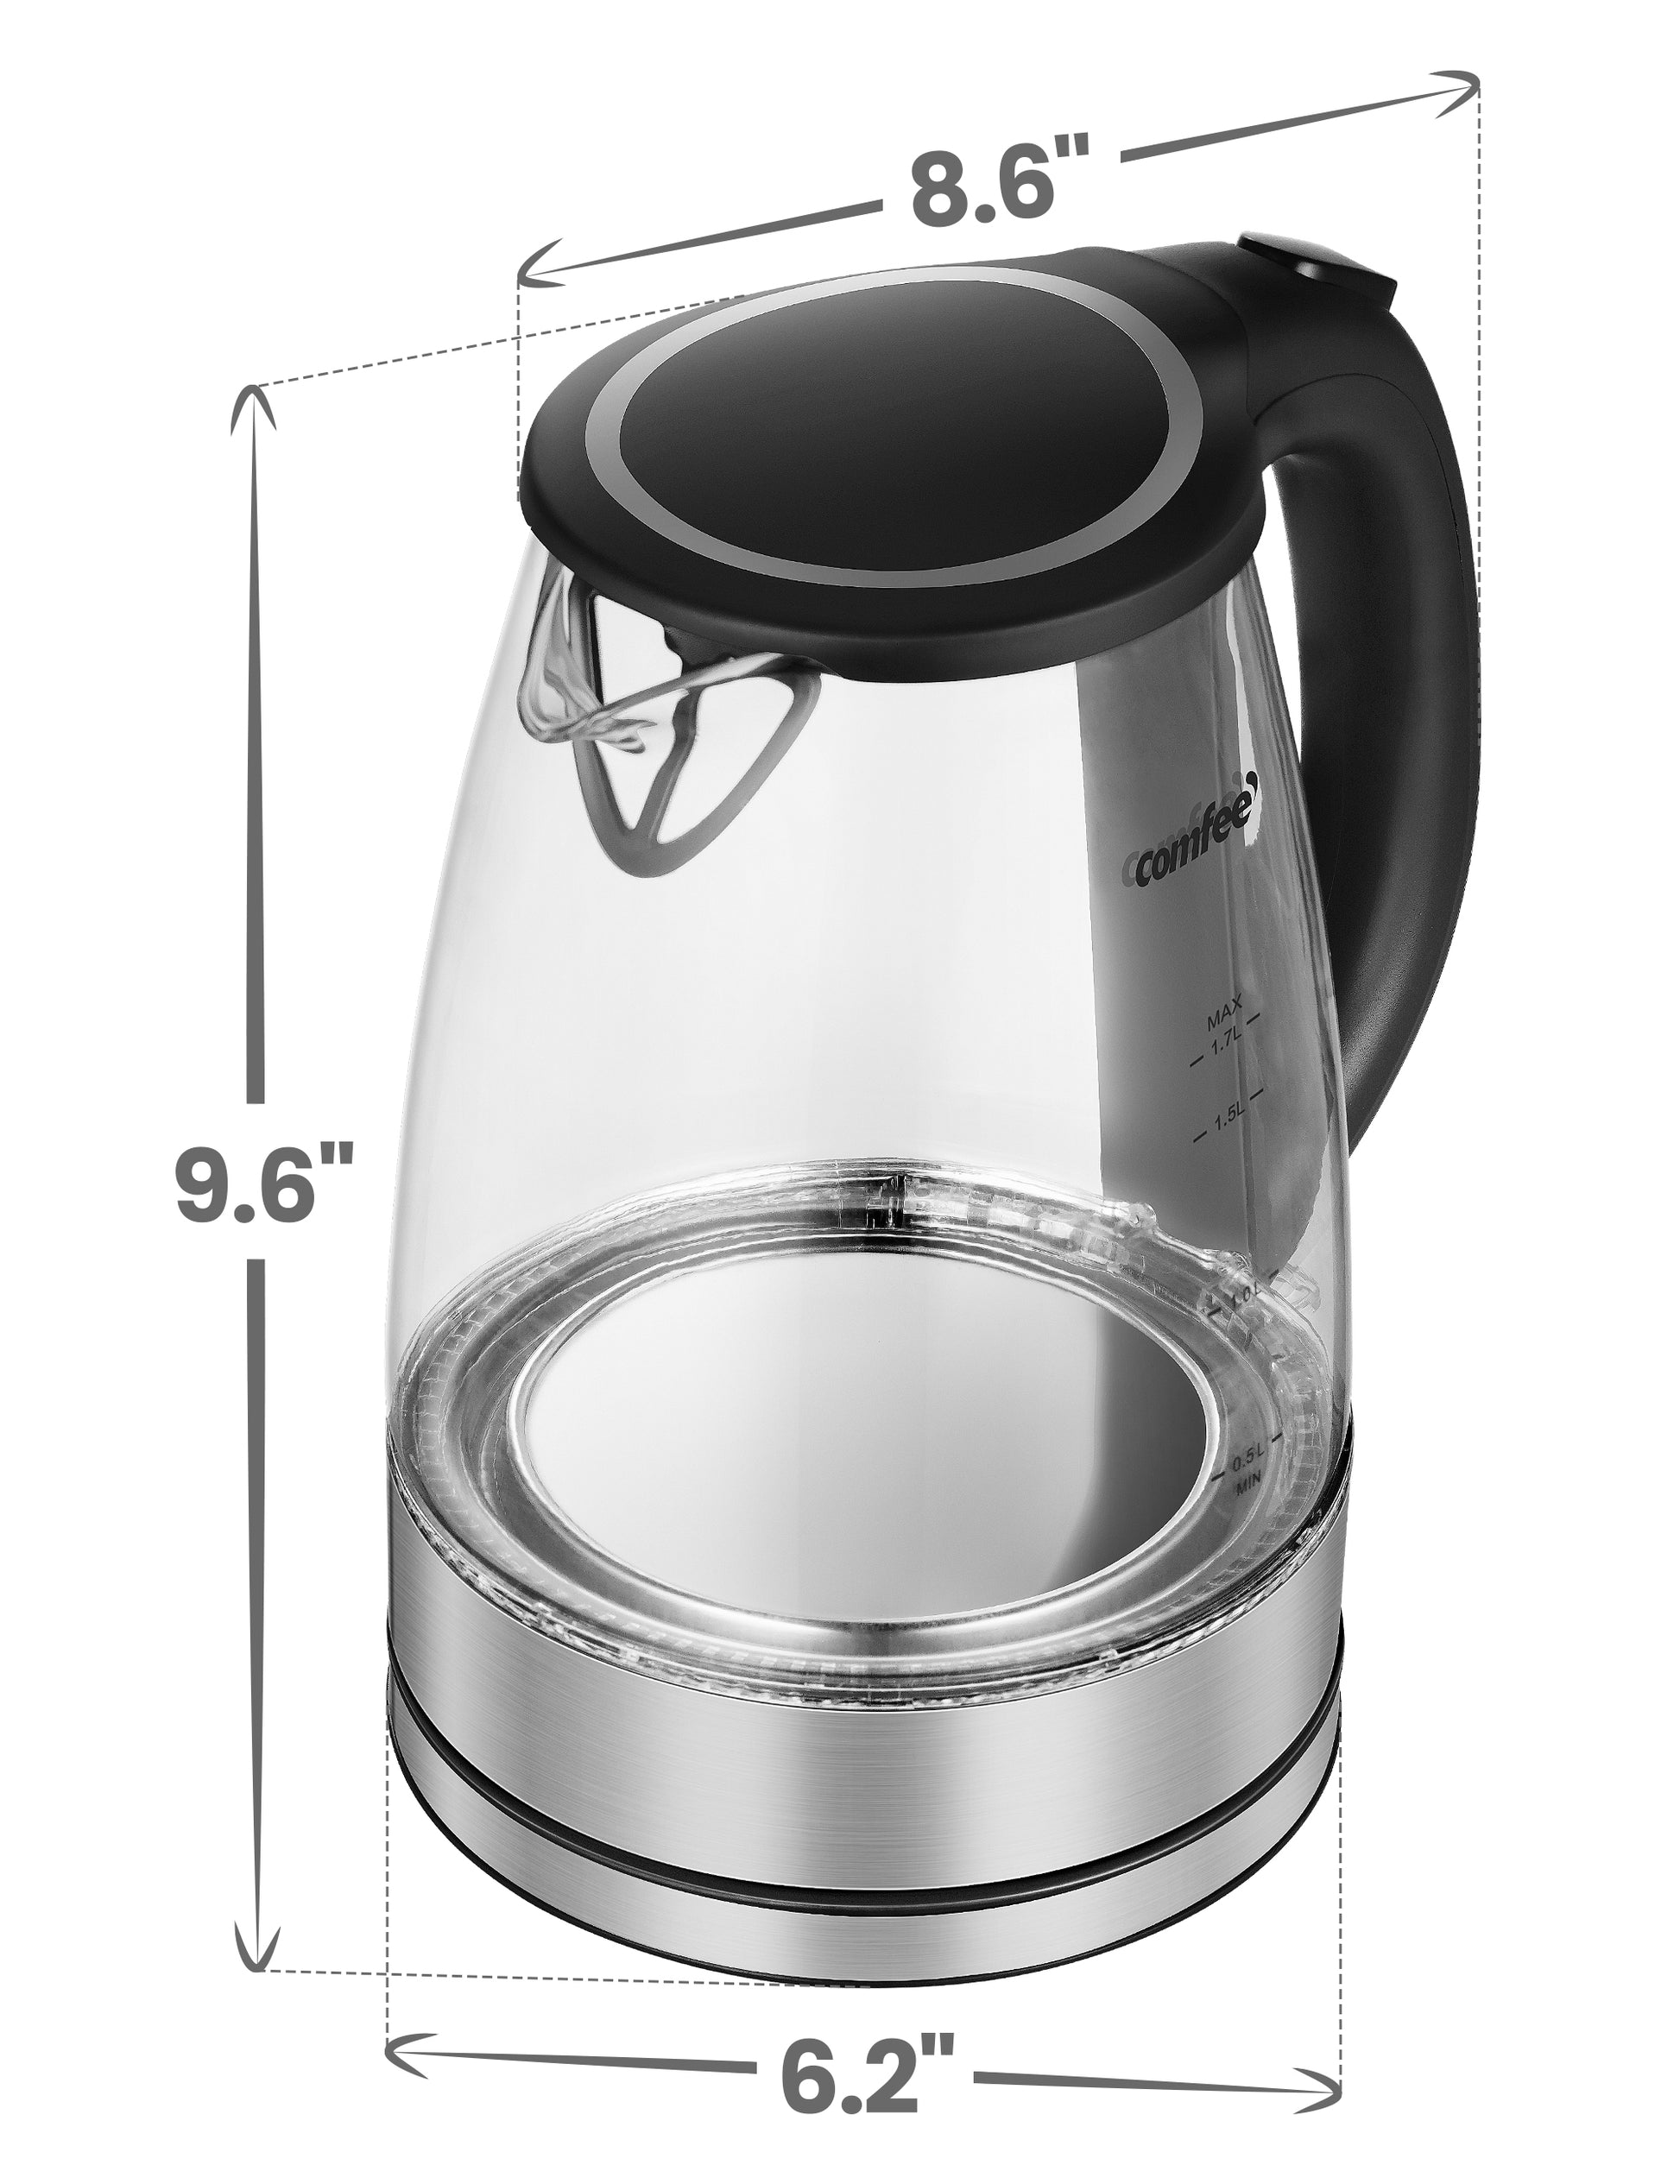 Comfee 1.7L Quick Boiling Glass Electric Kettle - Instruction Manual